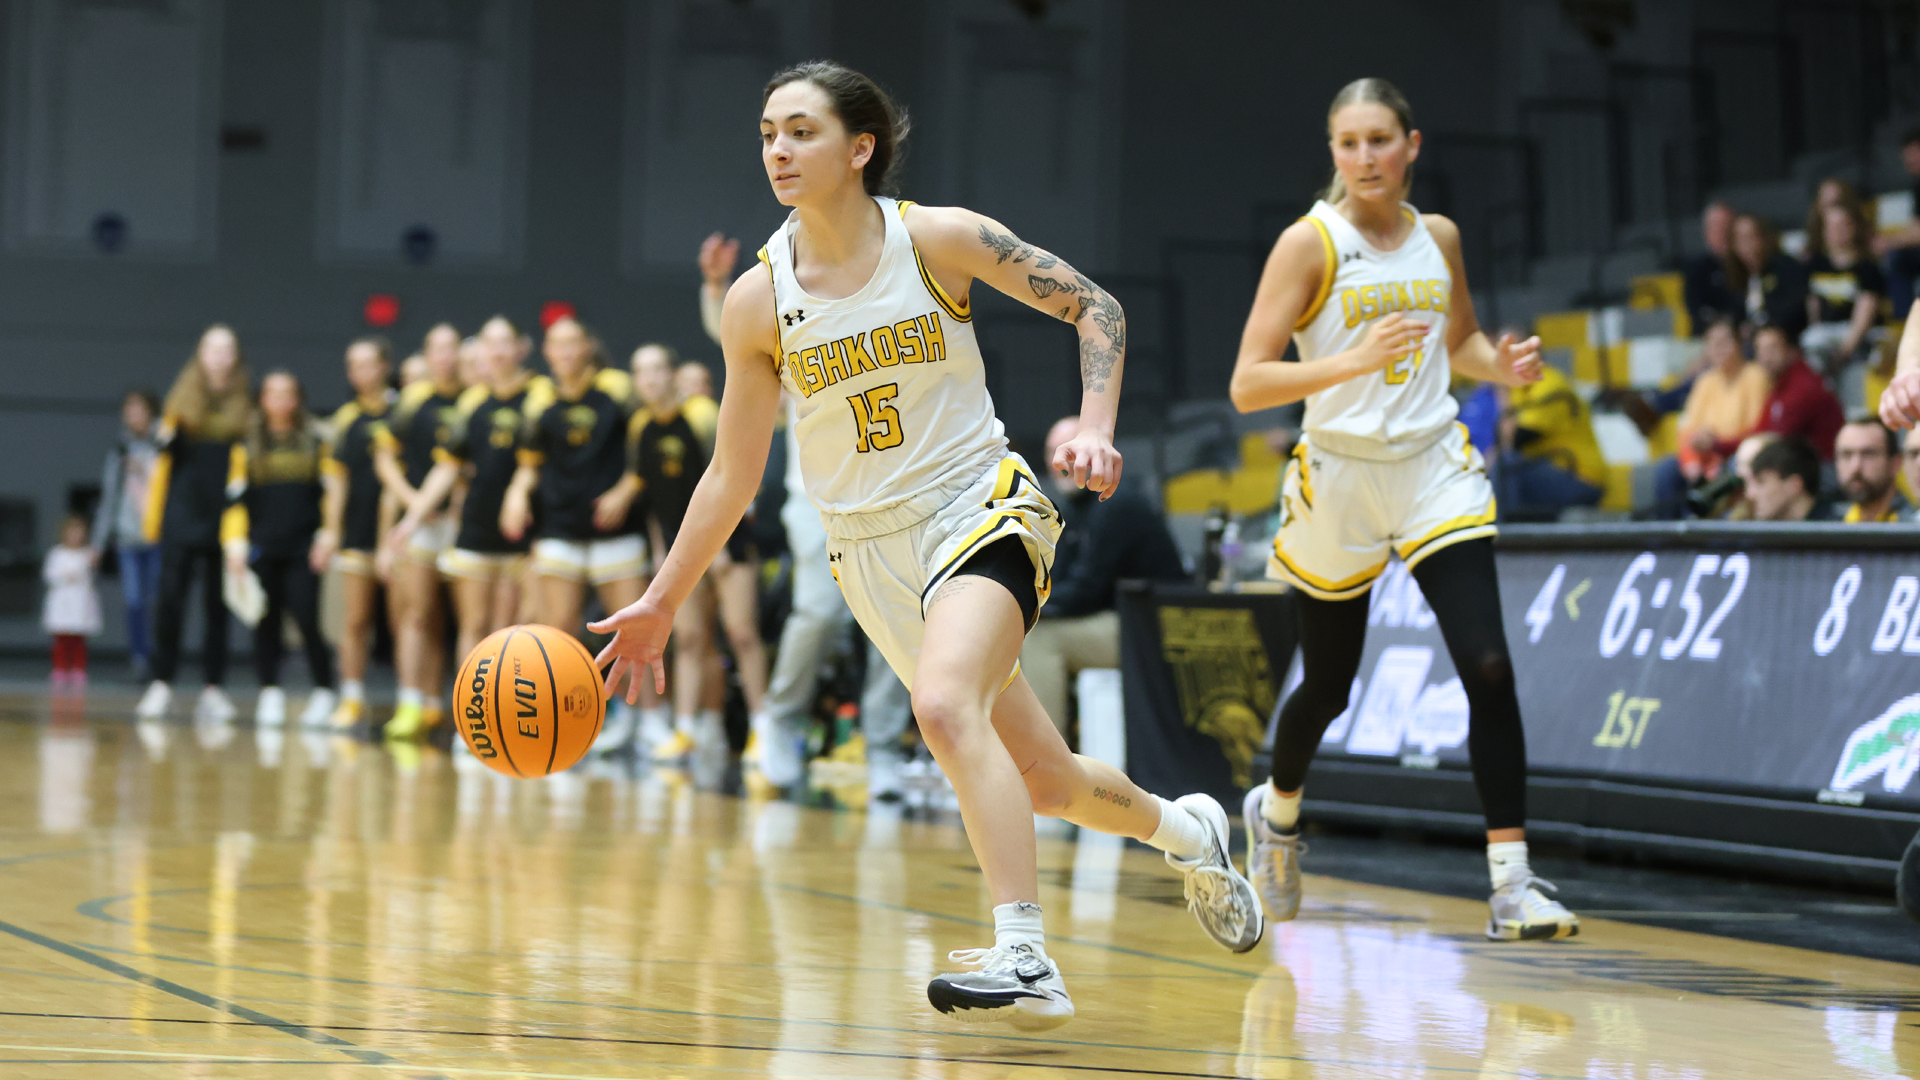 Kennedy Osterman scored 16 points, shooting five-of-nine from the field, four-of-five from three and two-of-two from the line in the Titans' victory over UW-Eau Claire on Saturday.